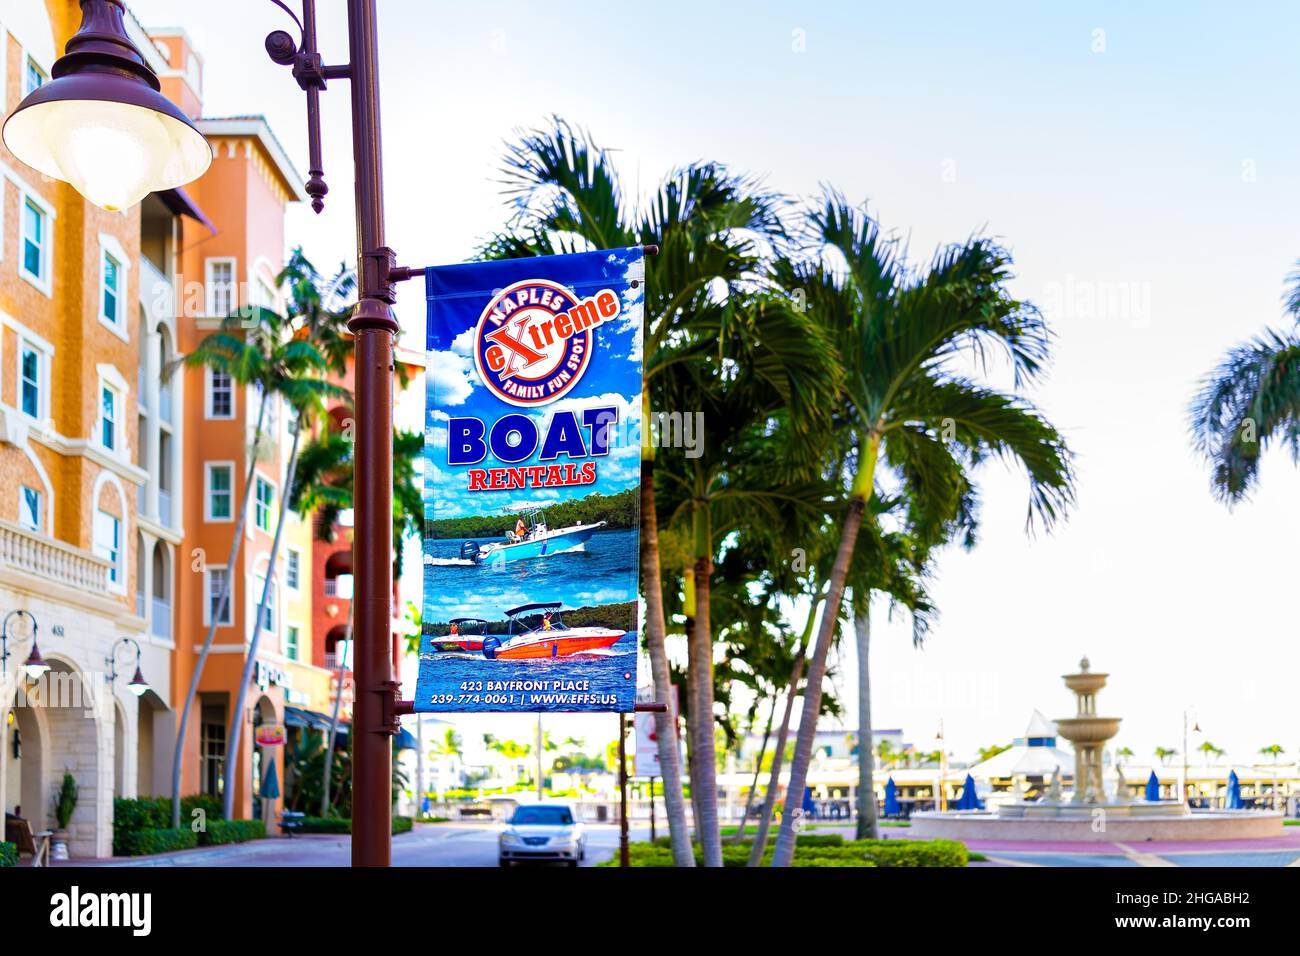 Naples, USA - September 13, 2021: Naples, Florida Bayfront place center with sign for Extreme business company boat rentals with palm trees and water Stock Photo